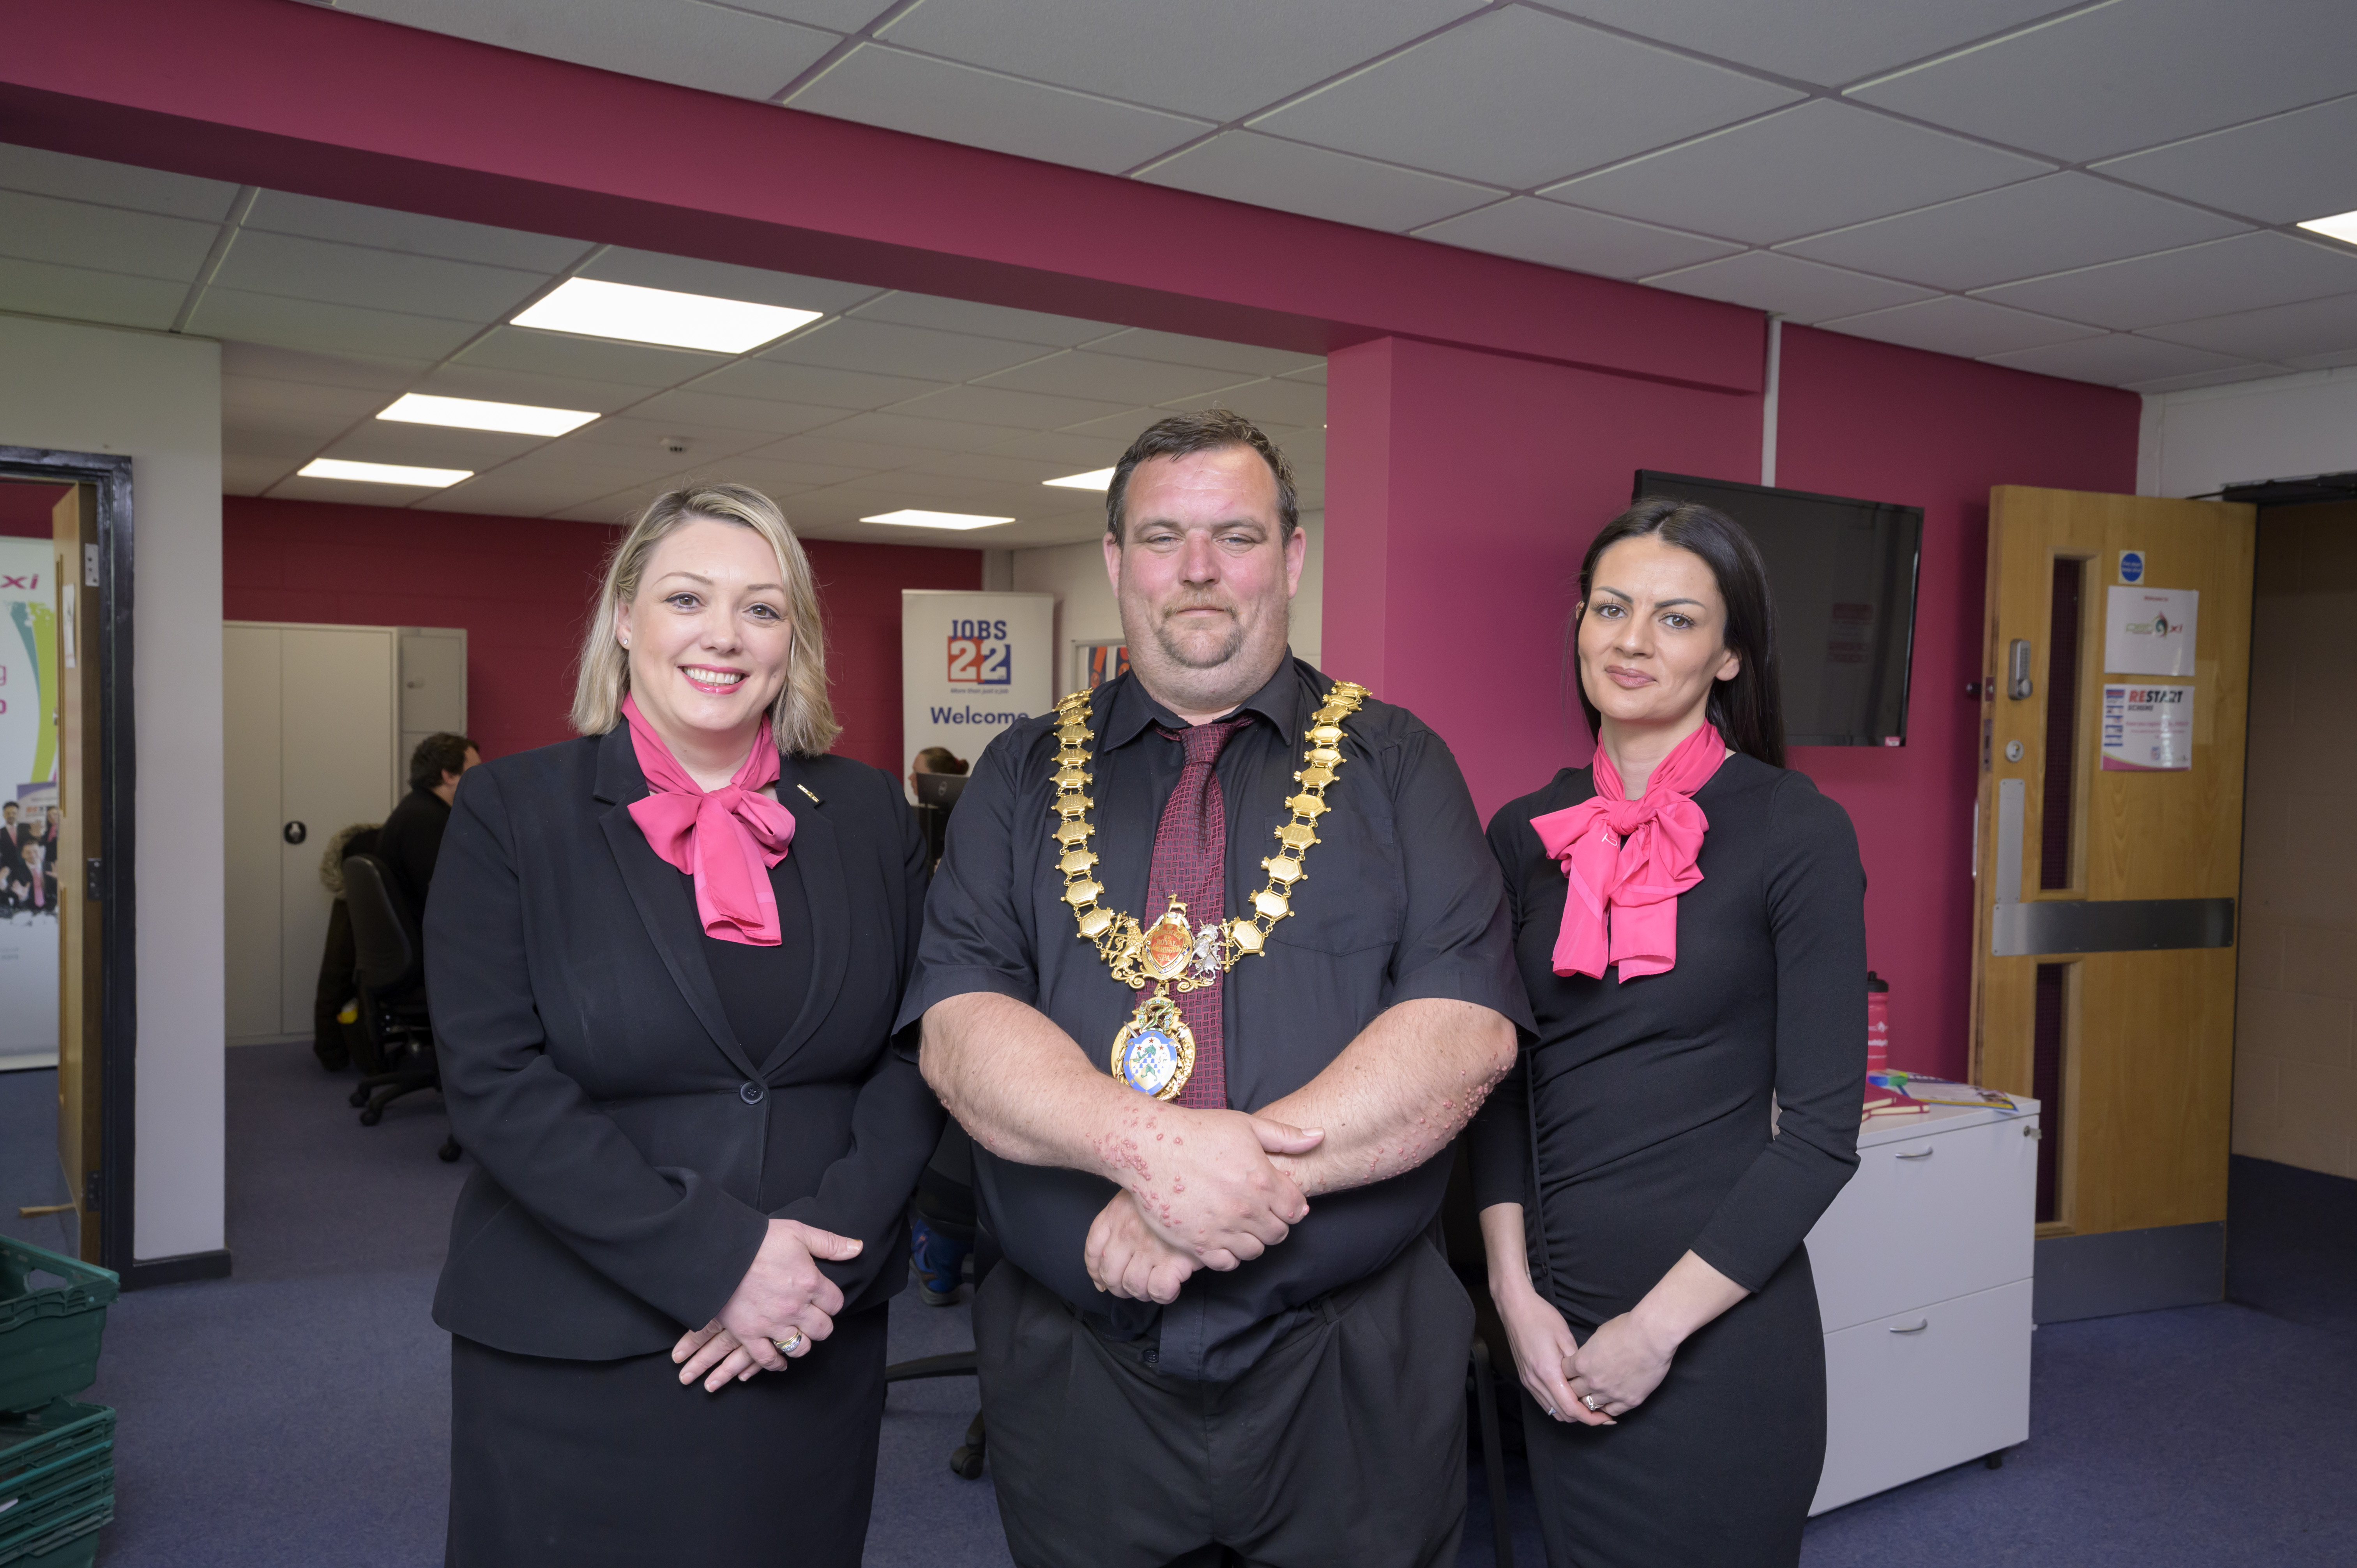 Leamington mayor visits highly successful Restart scheme after own experience of unemployment